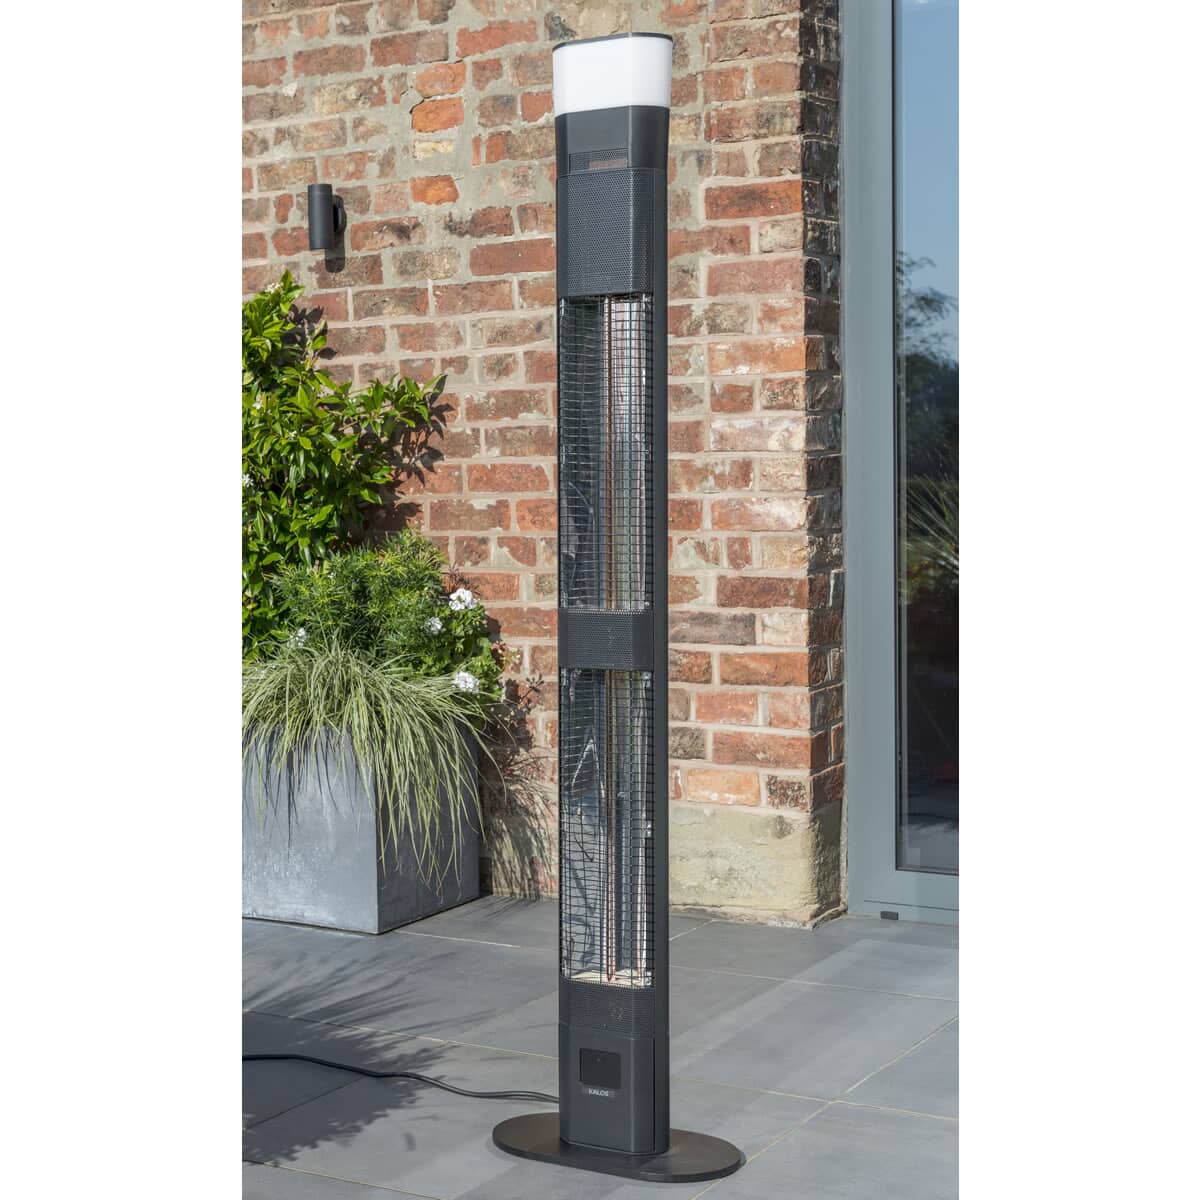 Kettler Kalos Ibiza - Large Floor Standing Heater 3000w with LED Lights and Bluetooth Speaker